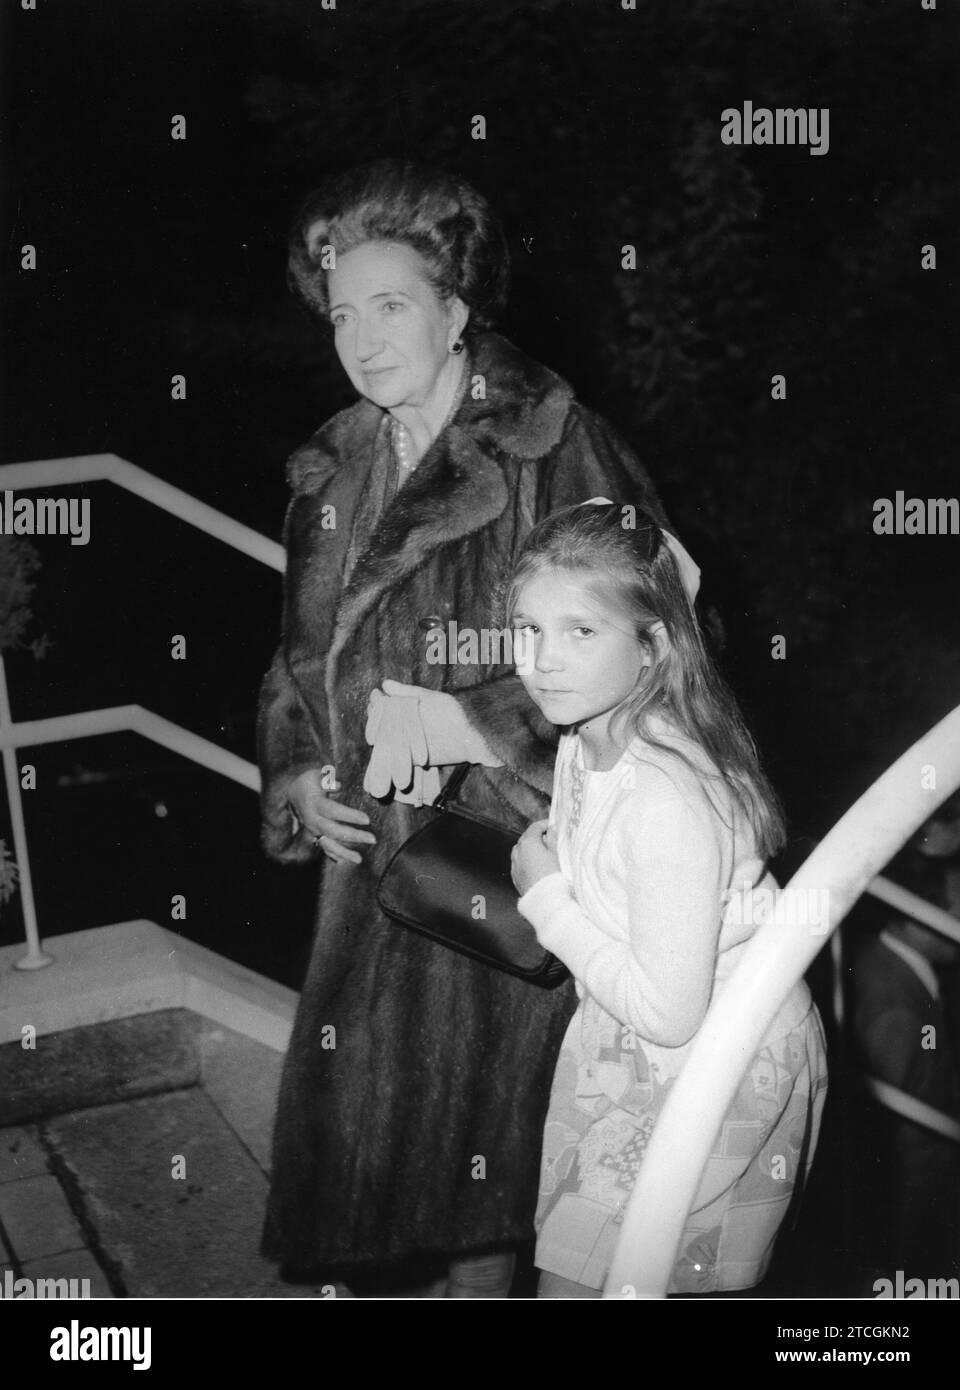 10/21/1973. The Countess of Barcelona with her granddaughter Elena, at the baptism of the son of Infanta Margarita and Carlos Zurita. Credit: Album / Archivo ABC / Luis Alonso Stock Photo